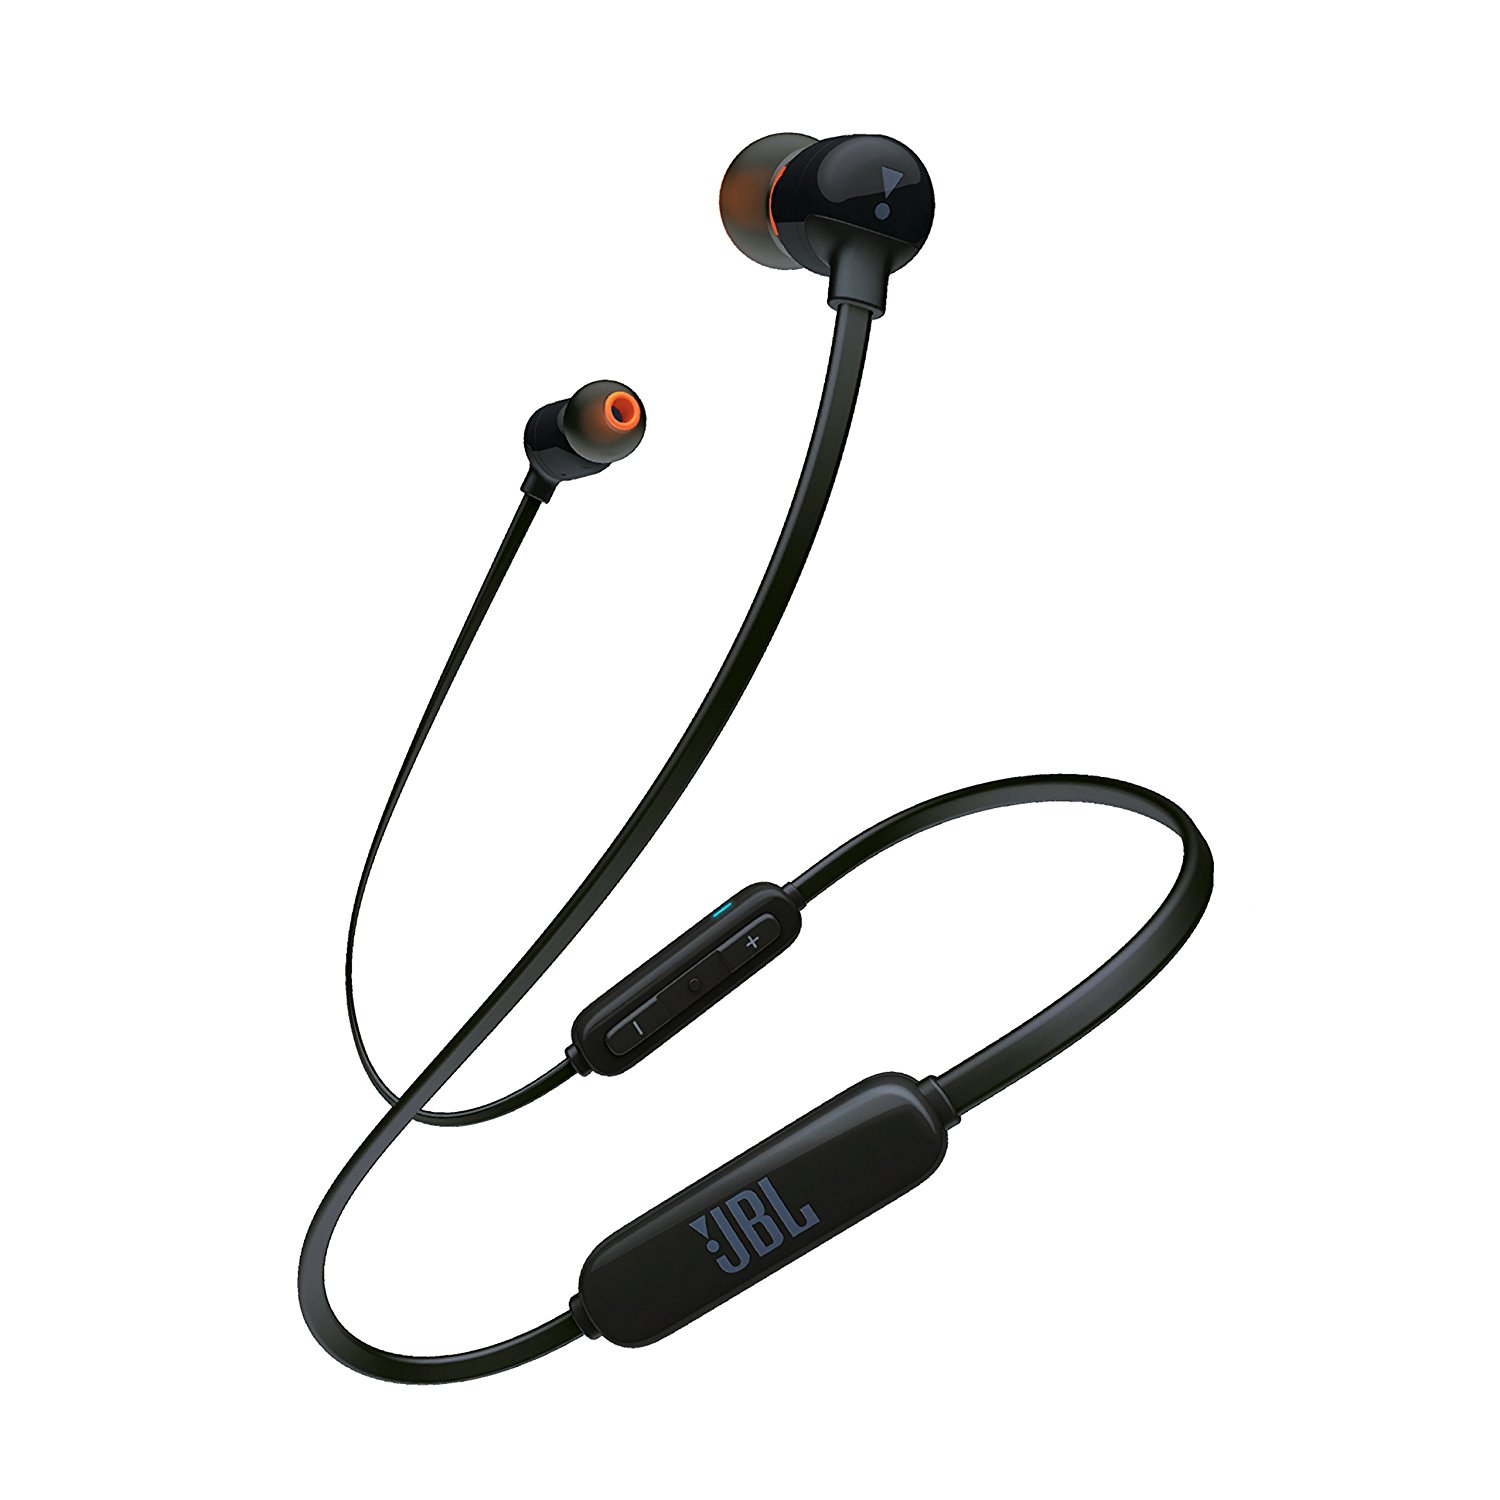 JBL TUNE 110 3.5mm Wired Earphones T110 Stereo Music Deep Bass Earbuds  Sports Headset In-line Control Handsfree with Microphone